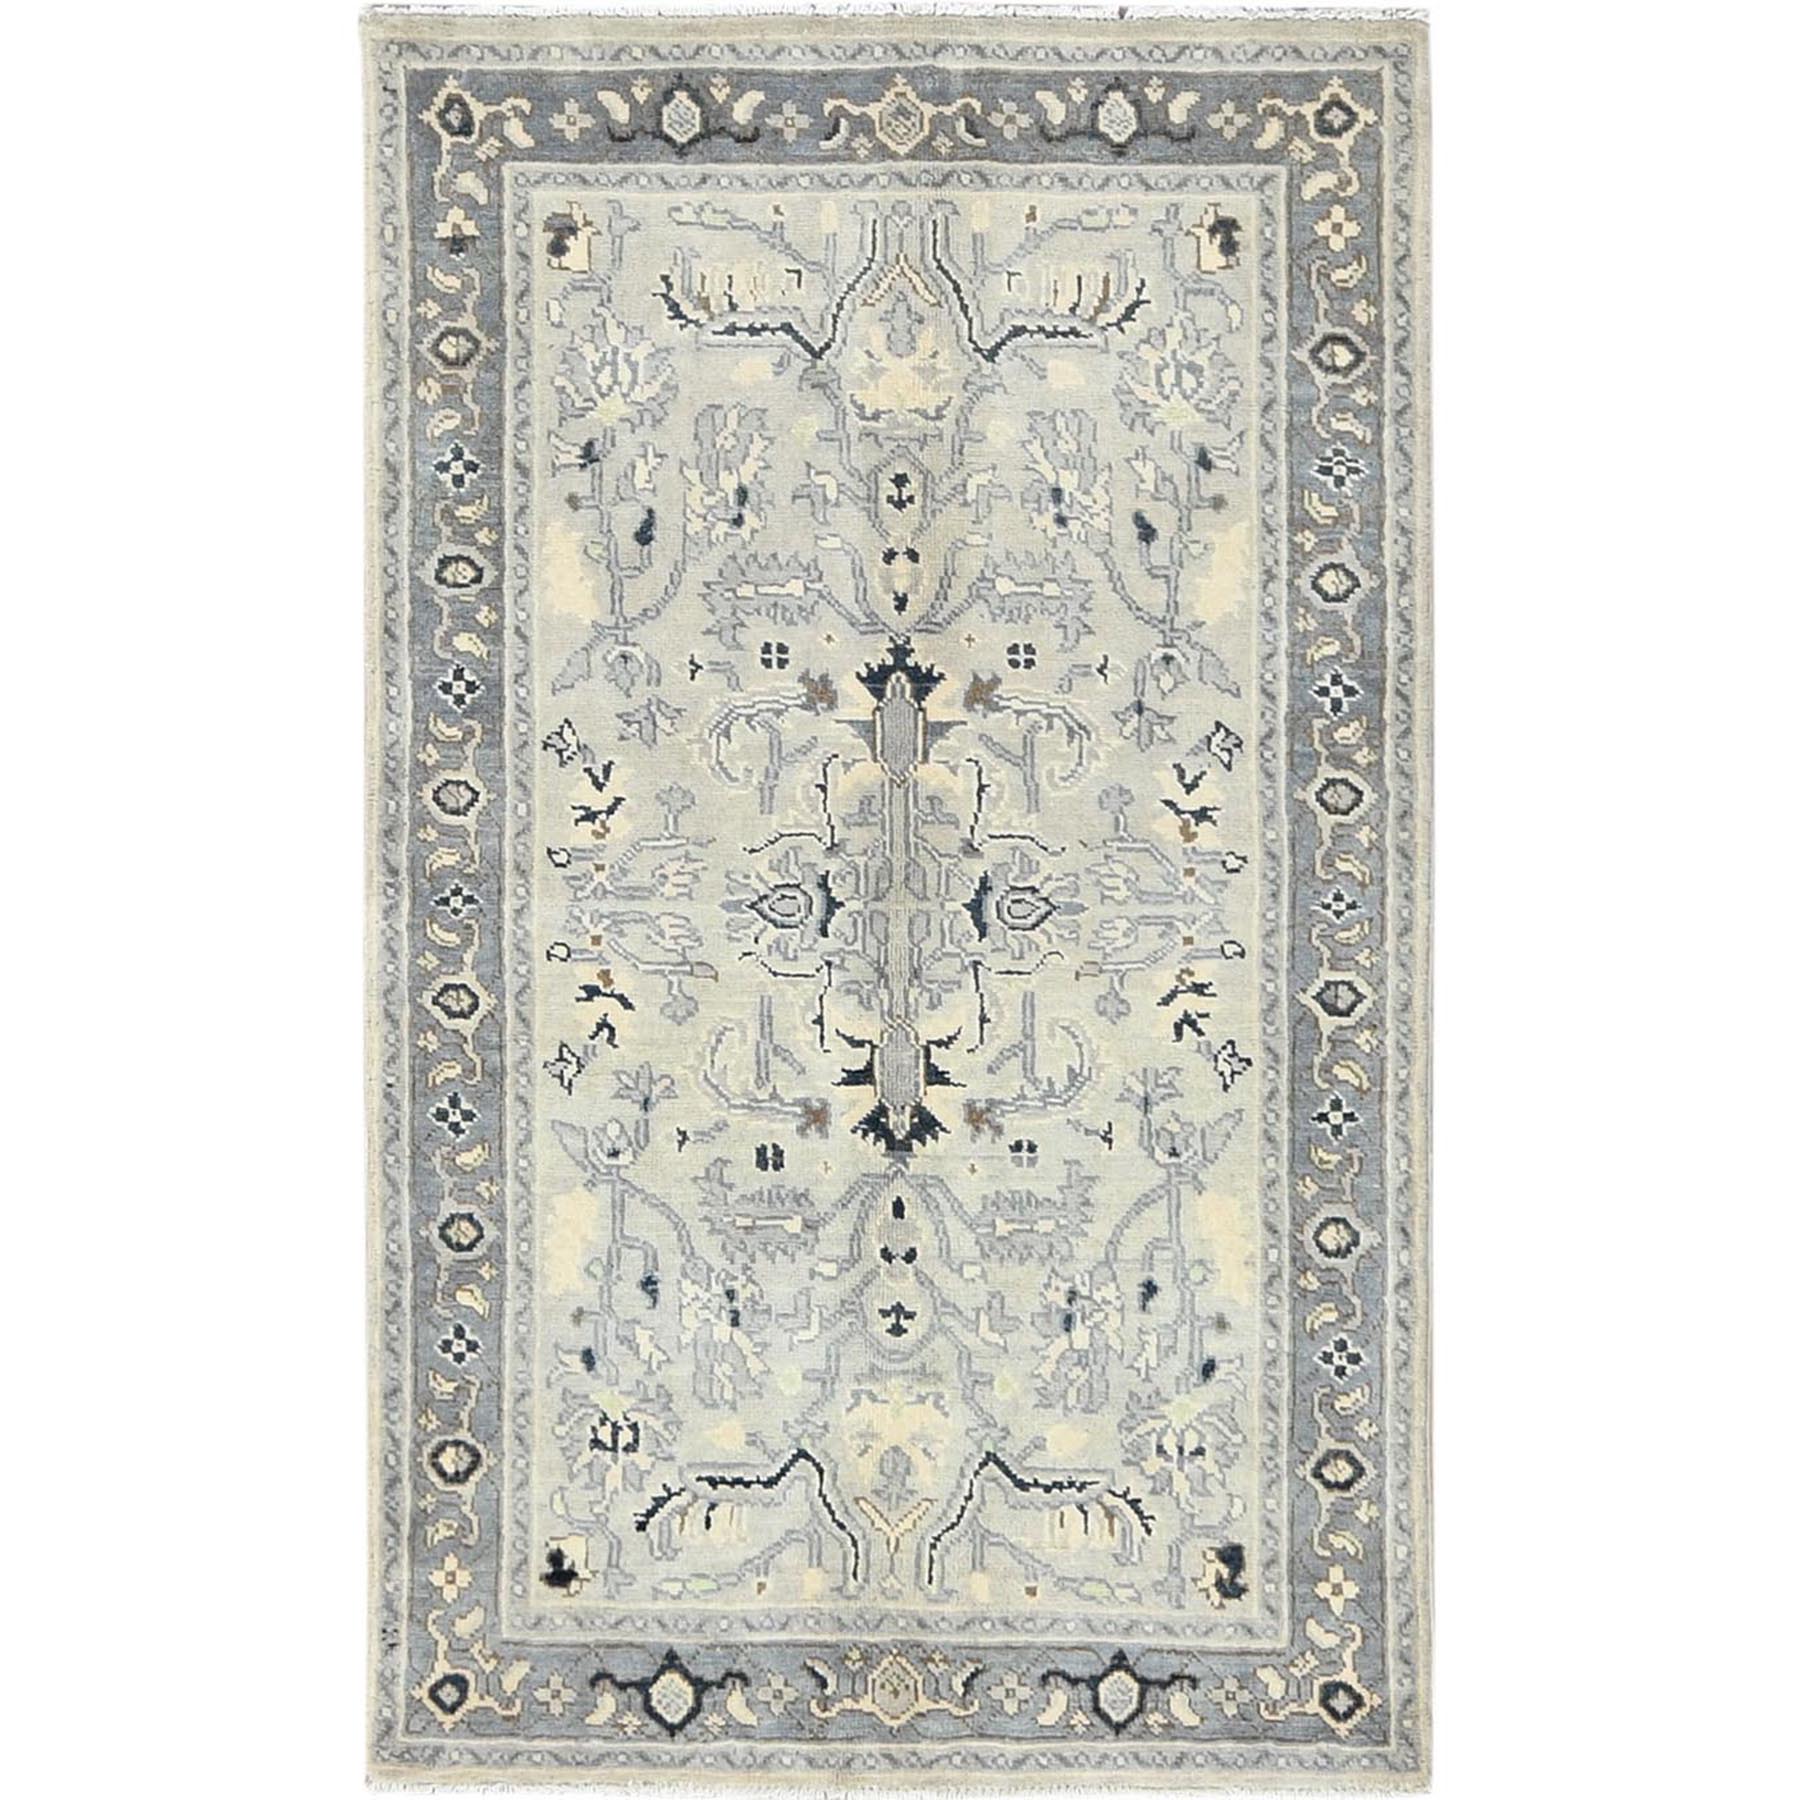  Wool Hand-Knotted Area Rug 2'10